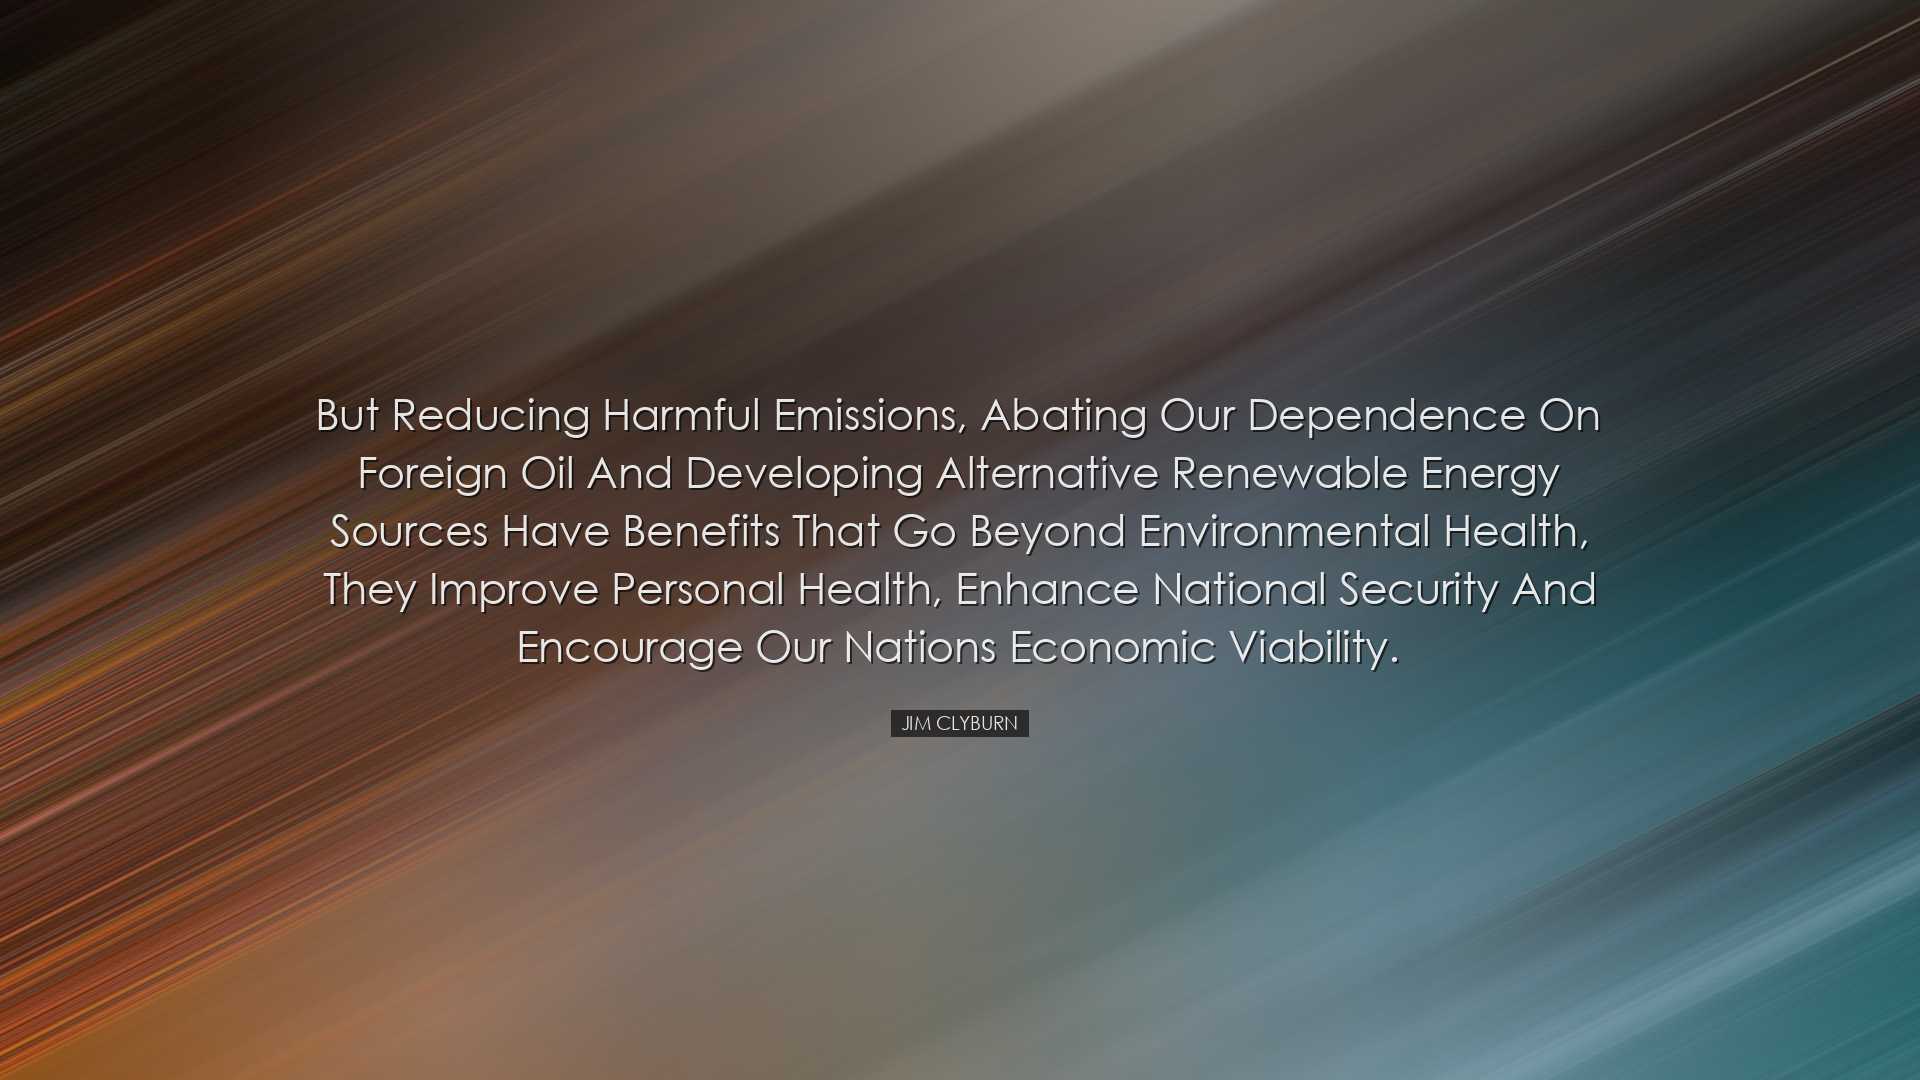 But reducing harmful emissions, abating our dependence on foreign